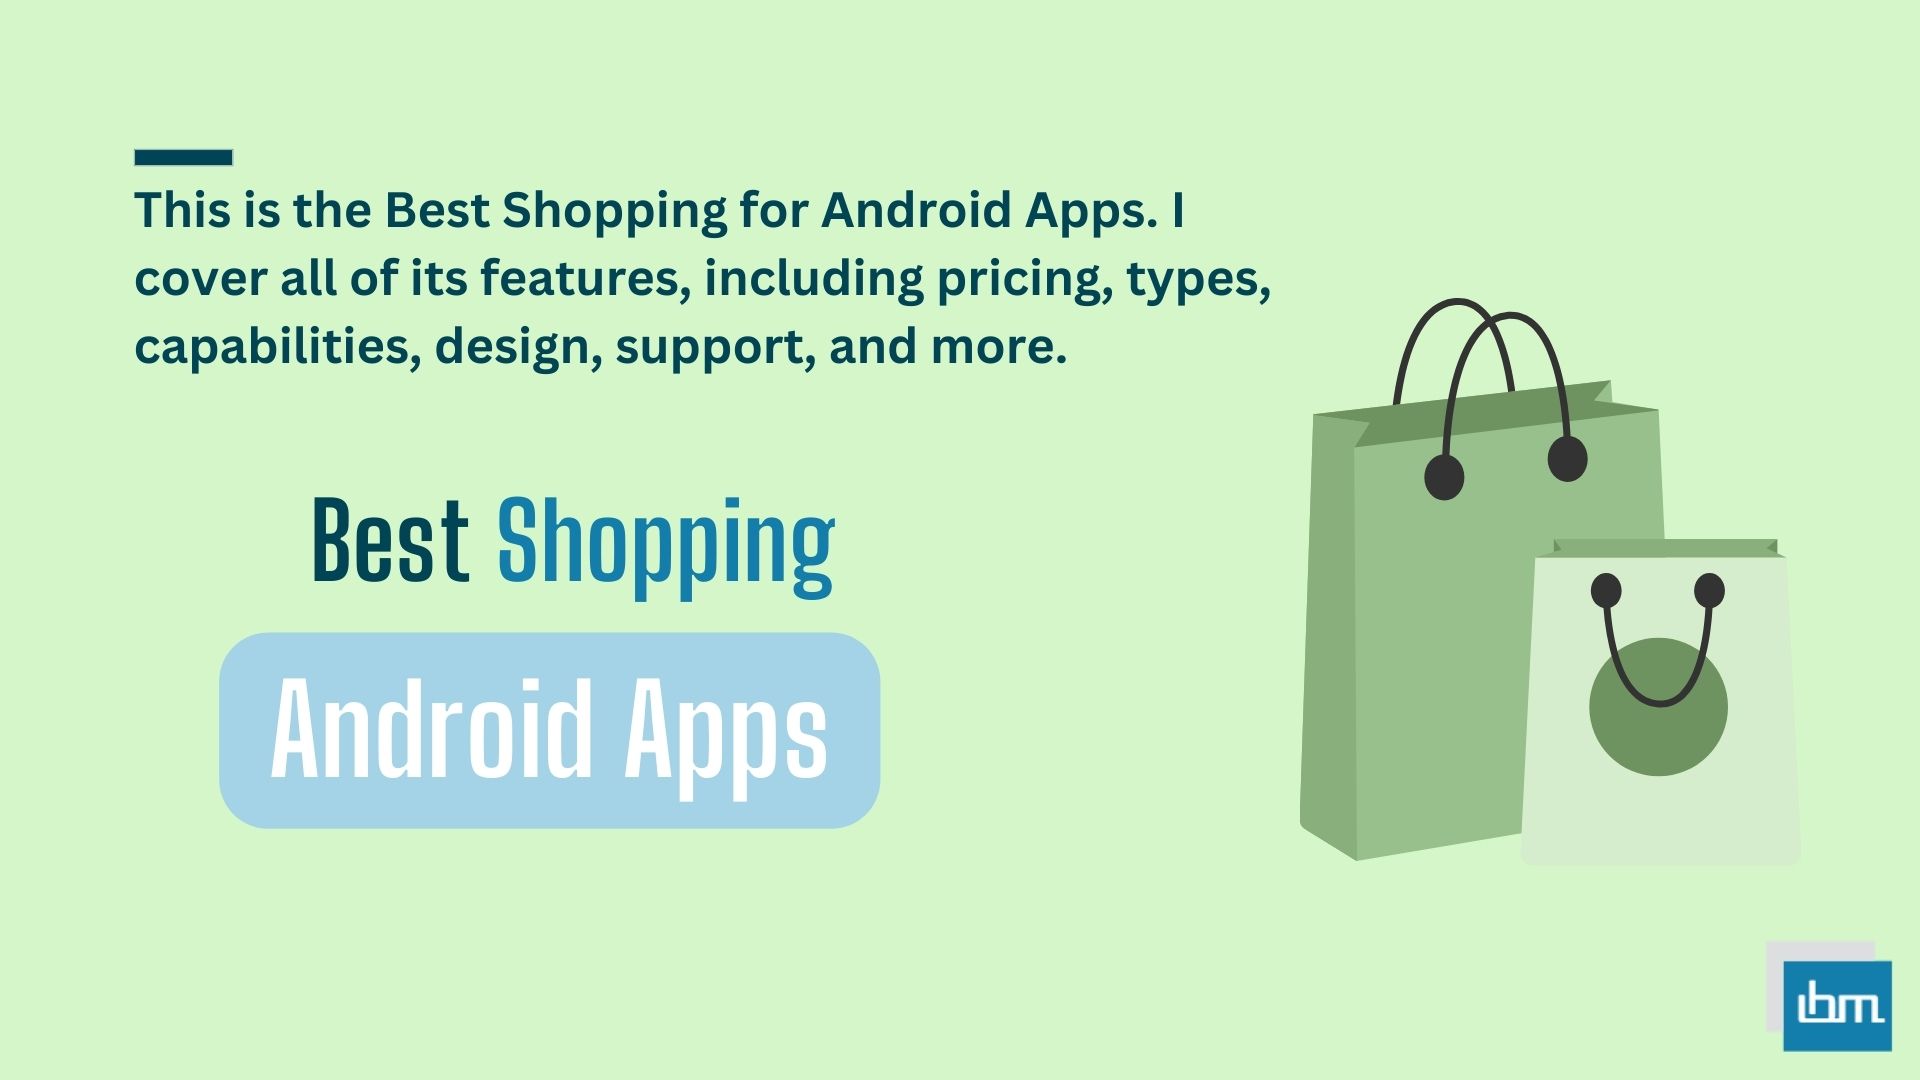 Best Shopping for Android Apps